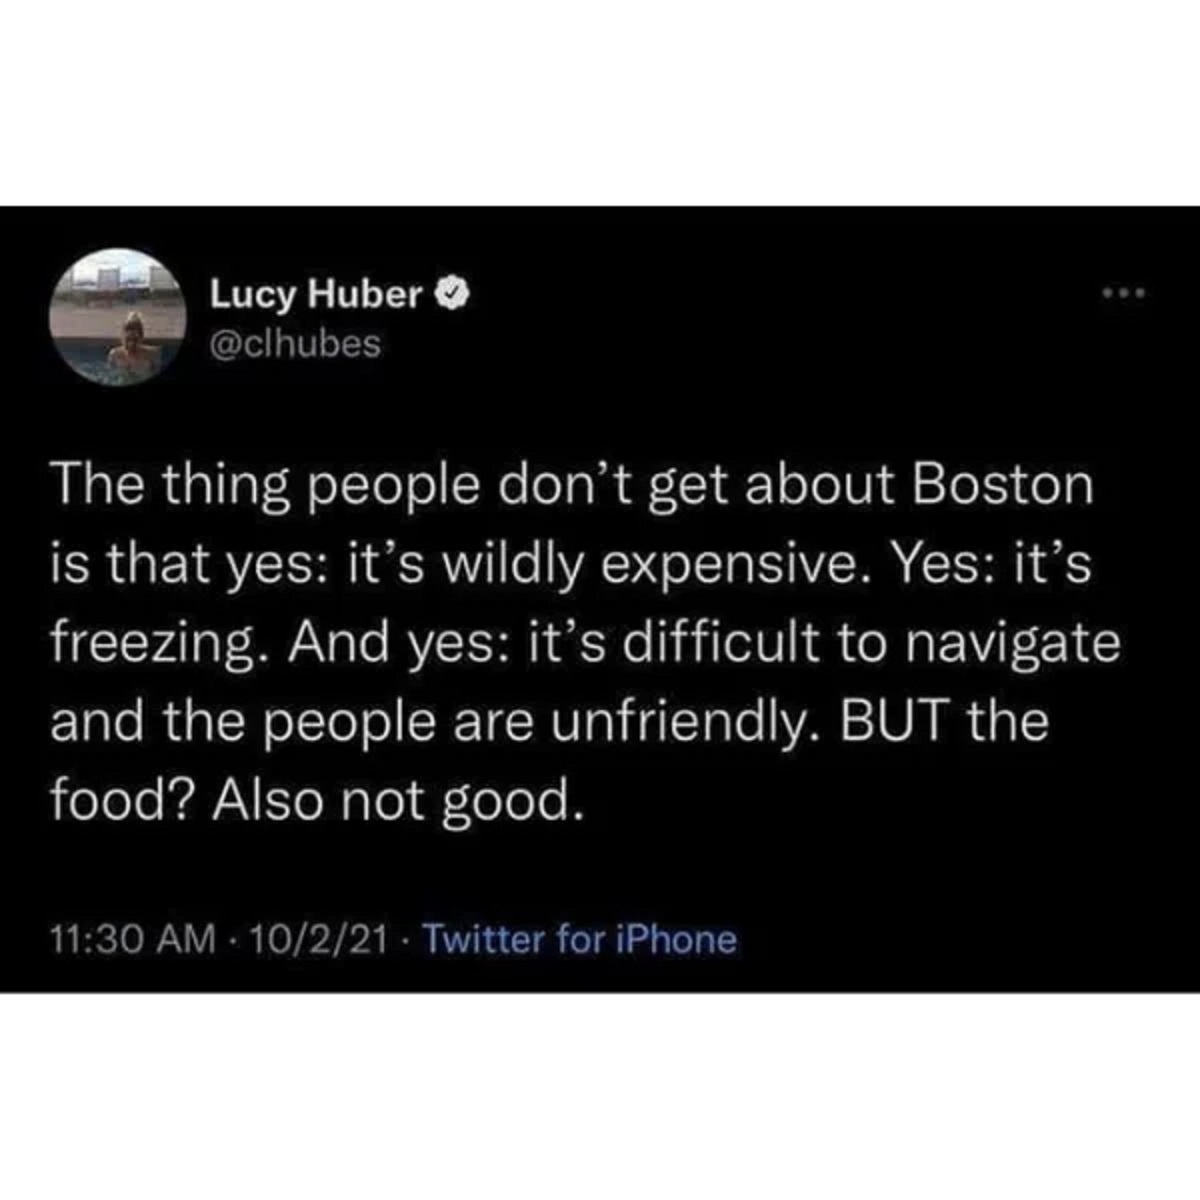 multimedia - Lucy Huber The thing people don't get about Boston is that yes it's wildly expensive. Yes it's freezing. And yes it's difficult to navigate and the people are unfriendly. But the food? Also not good. 10221 Twitter for iPhone